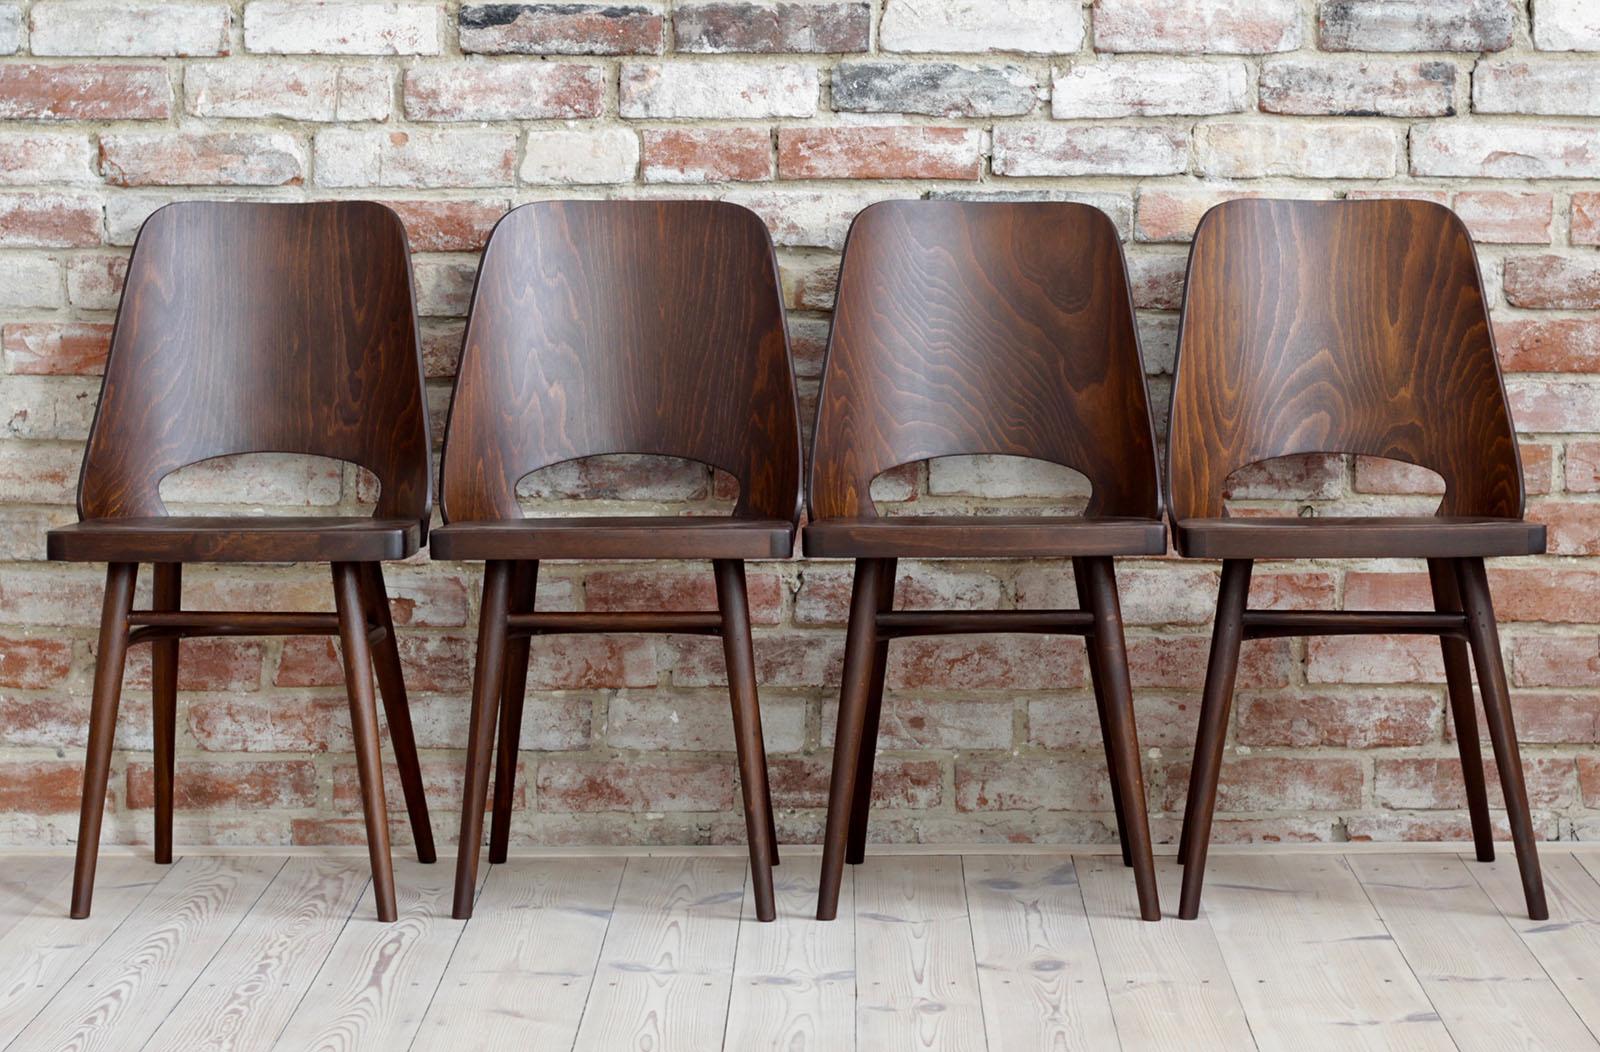 Set of 8 Chairs by Oswald Haerdtl, Beech Veneer, Oil Finish In Good Condition In Wrocław, Poland